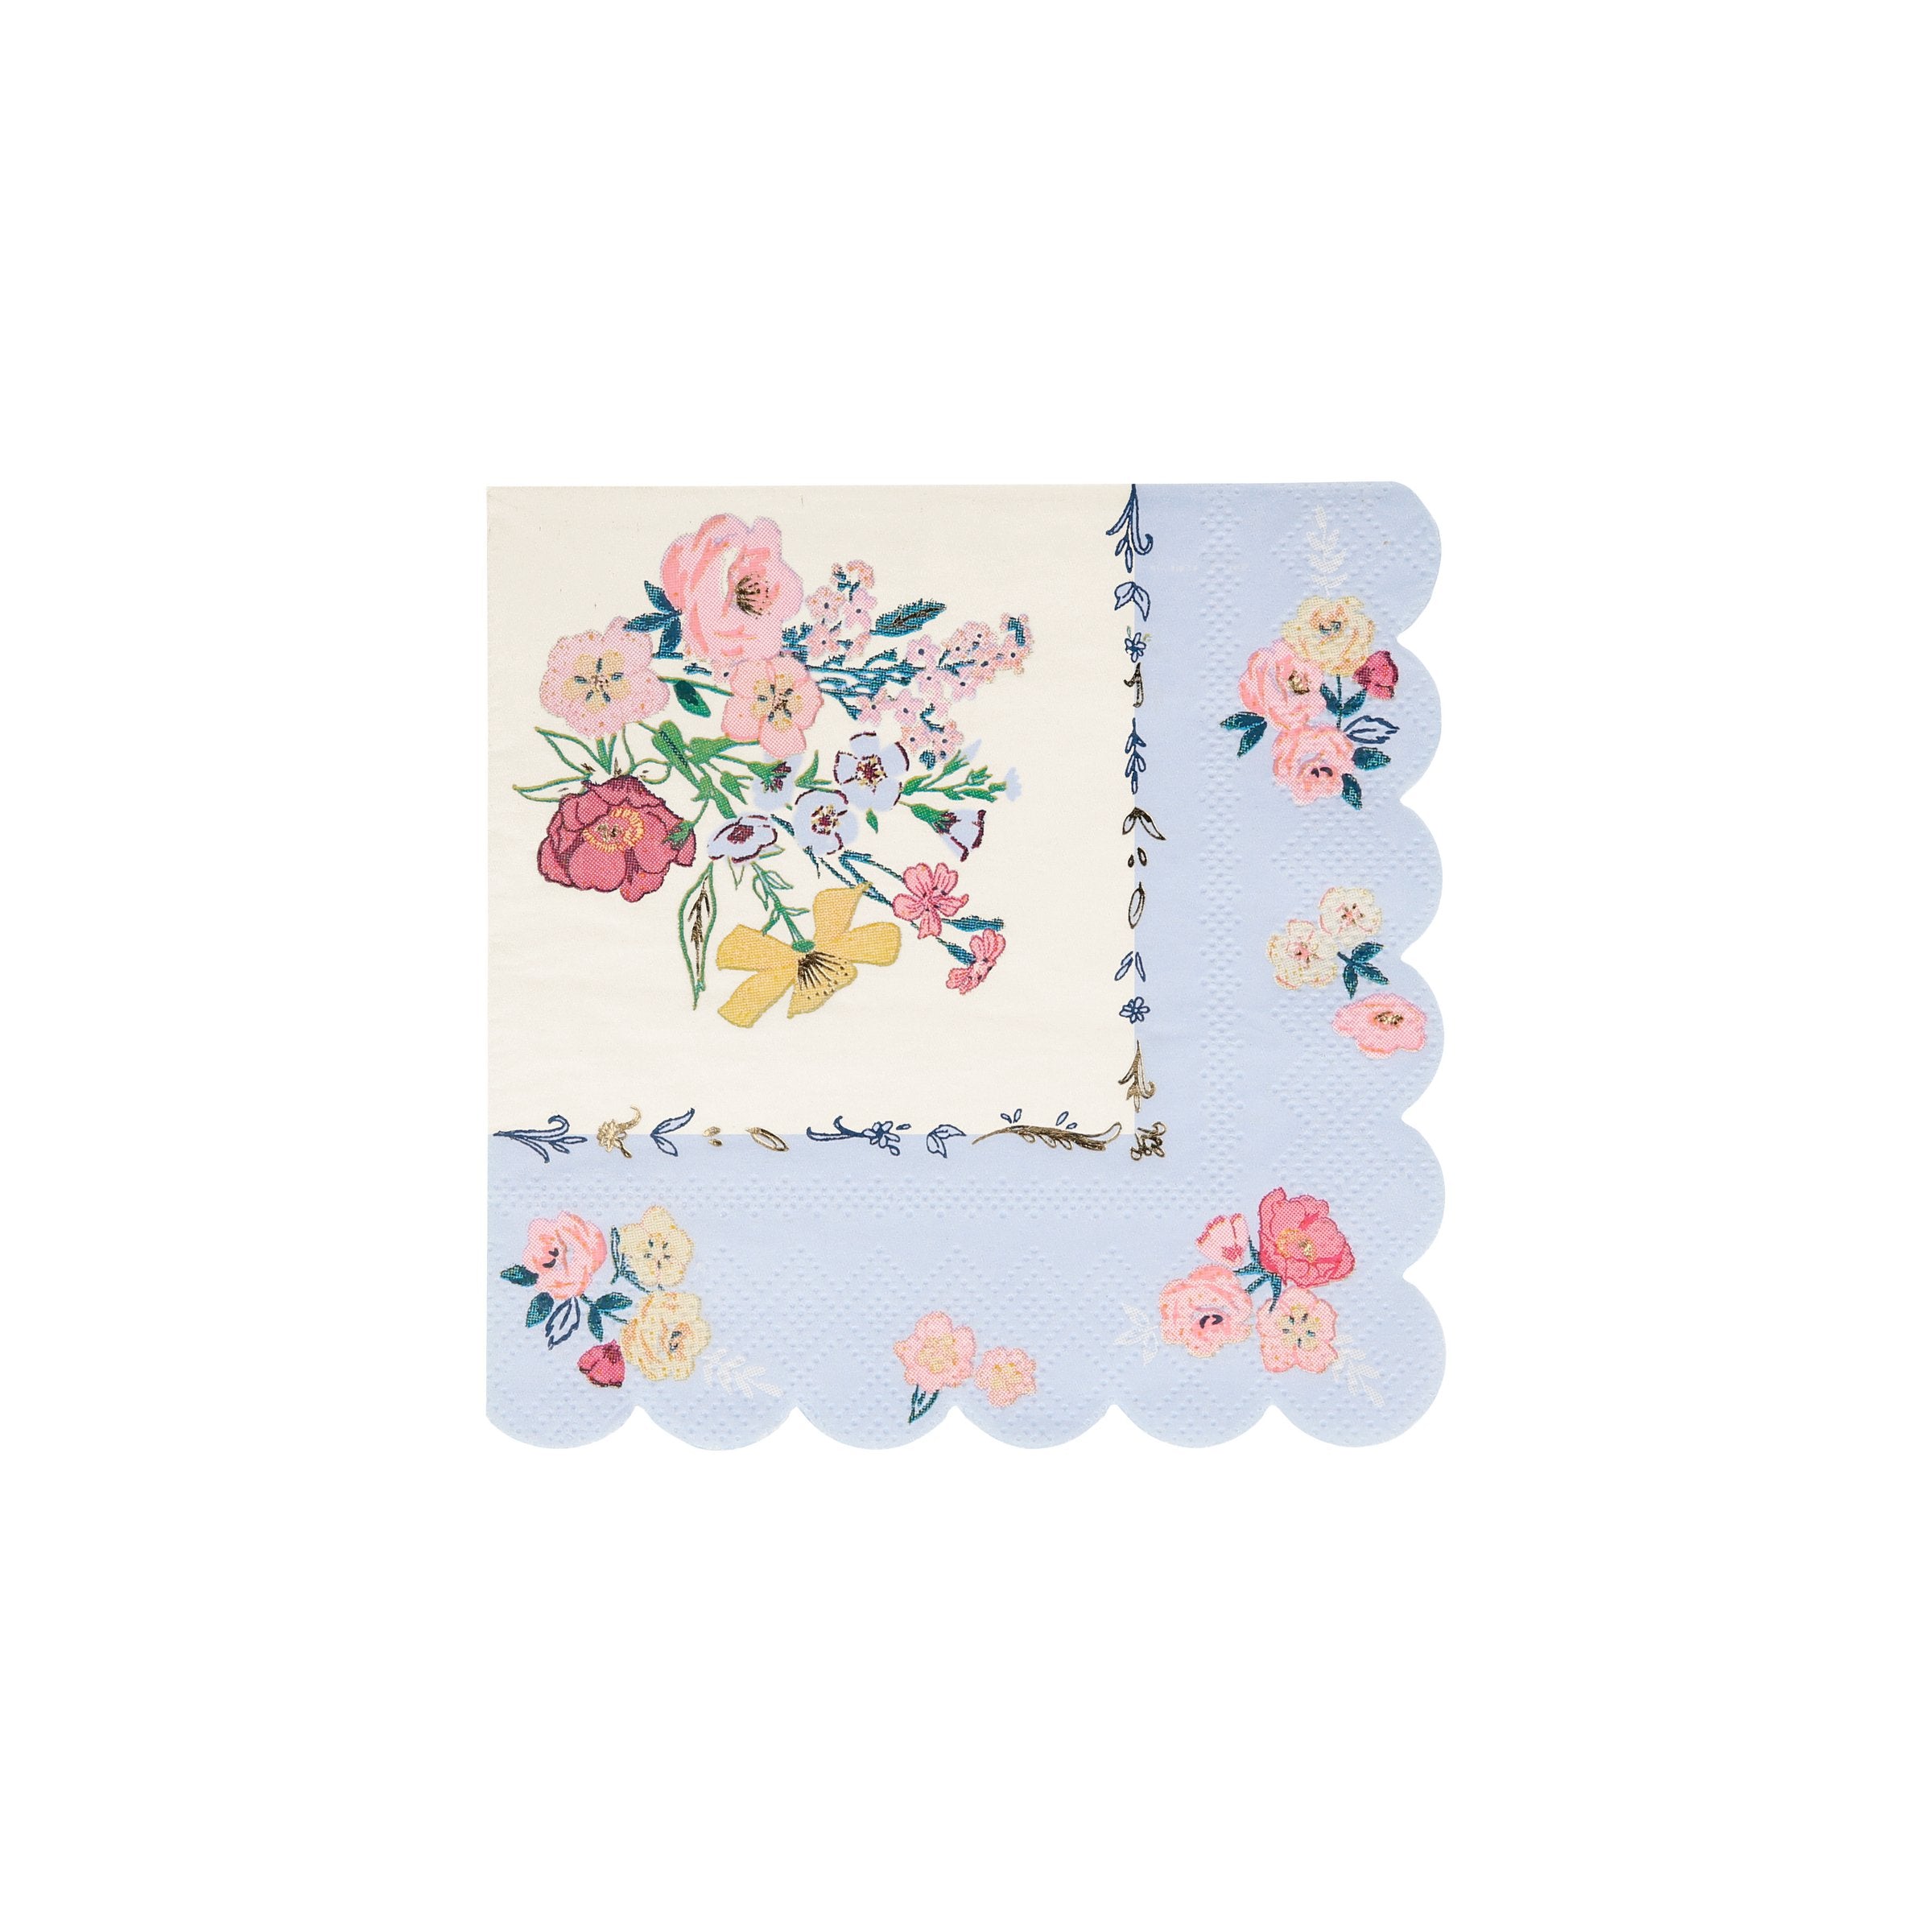 Our party napkins, in a small size, with pretty flower designs, are ideal for cocktail parties, garden parties or picnics.